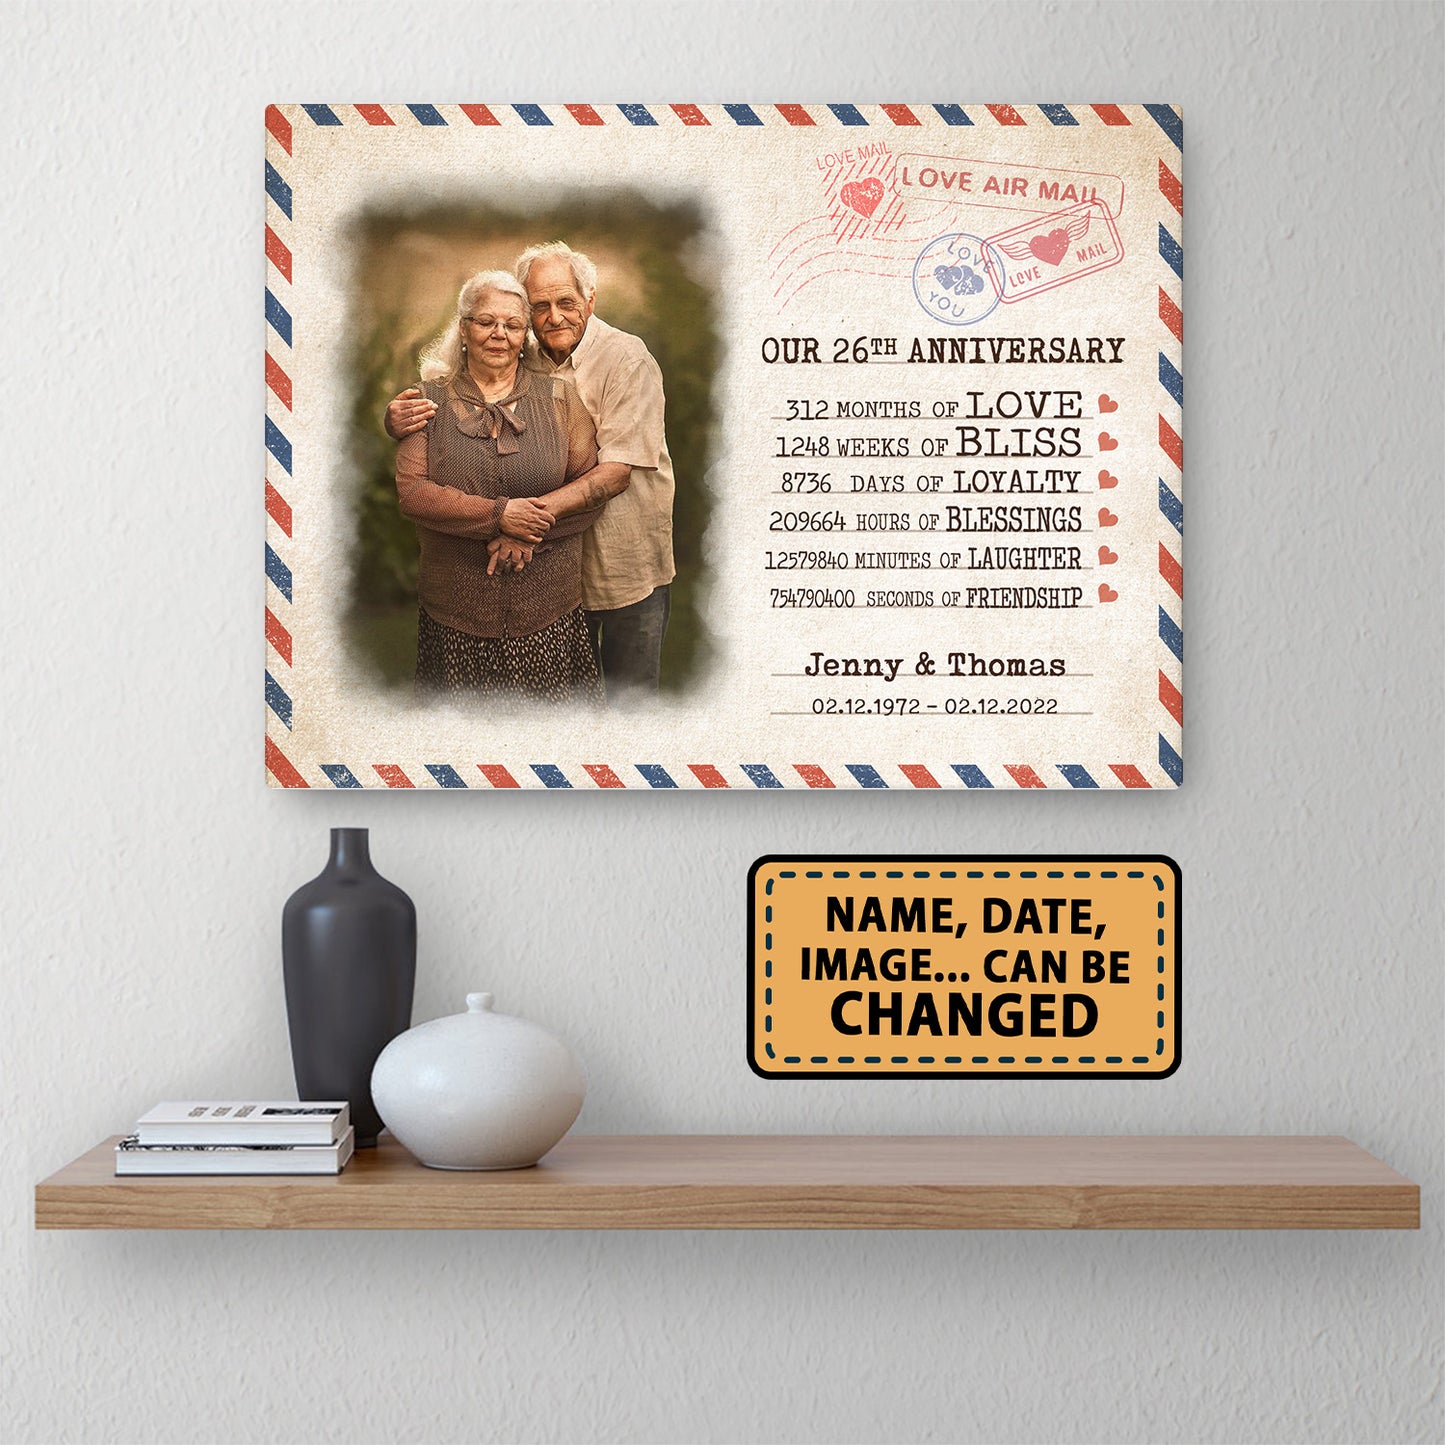 Our 26th Anniversary Letter Valentine Gift Personalized Canvas